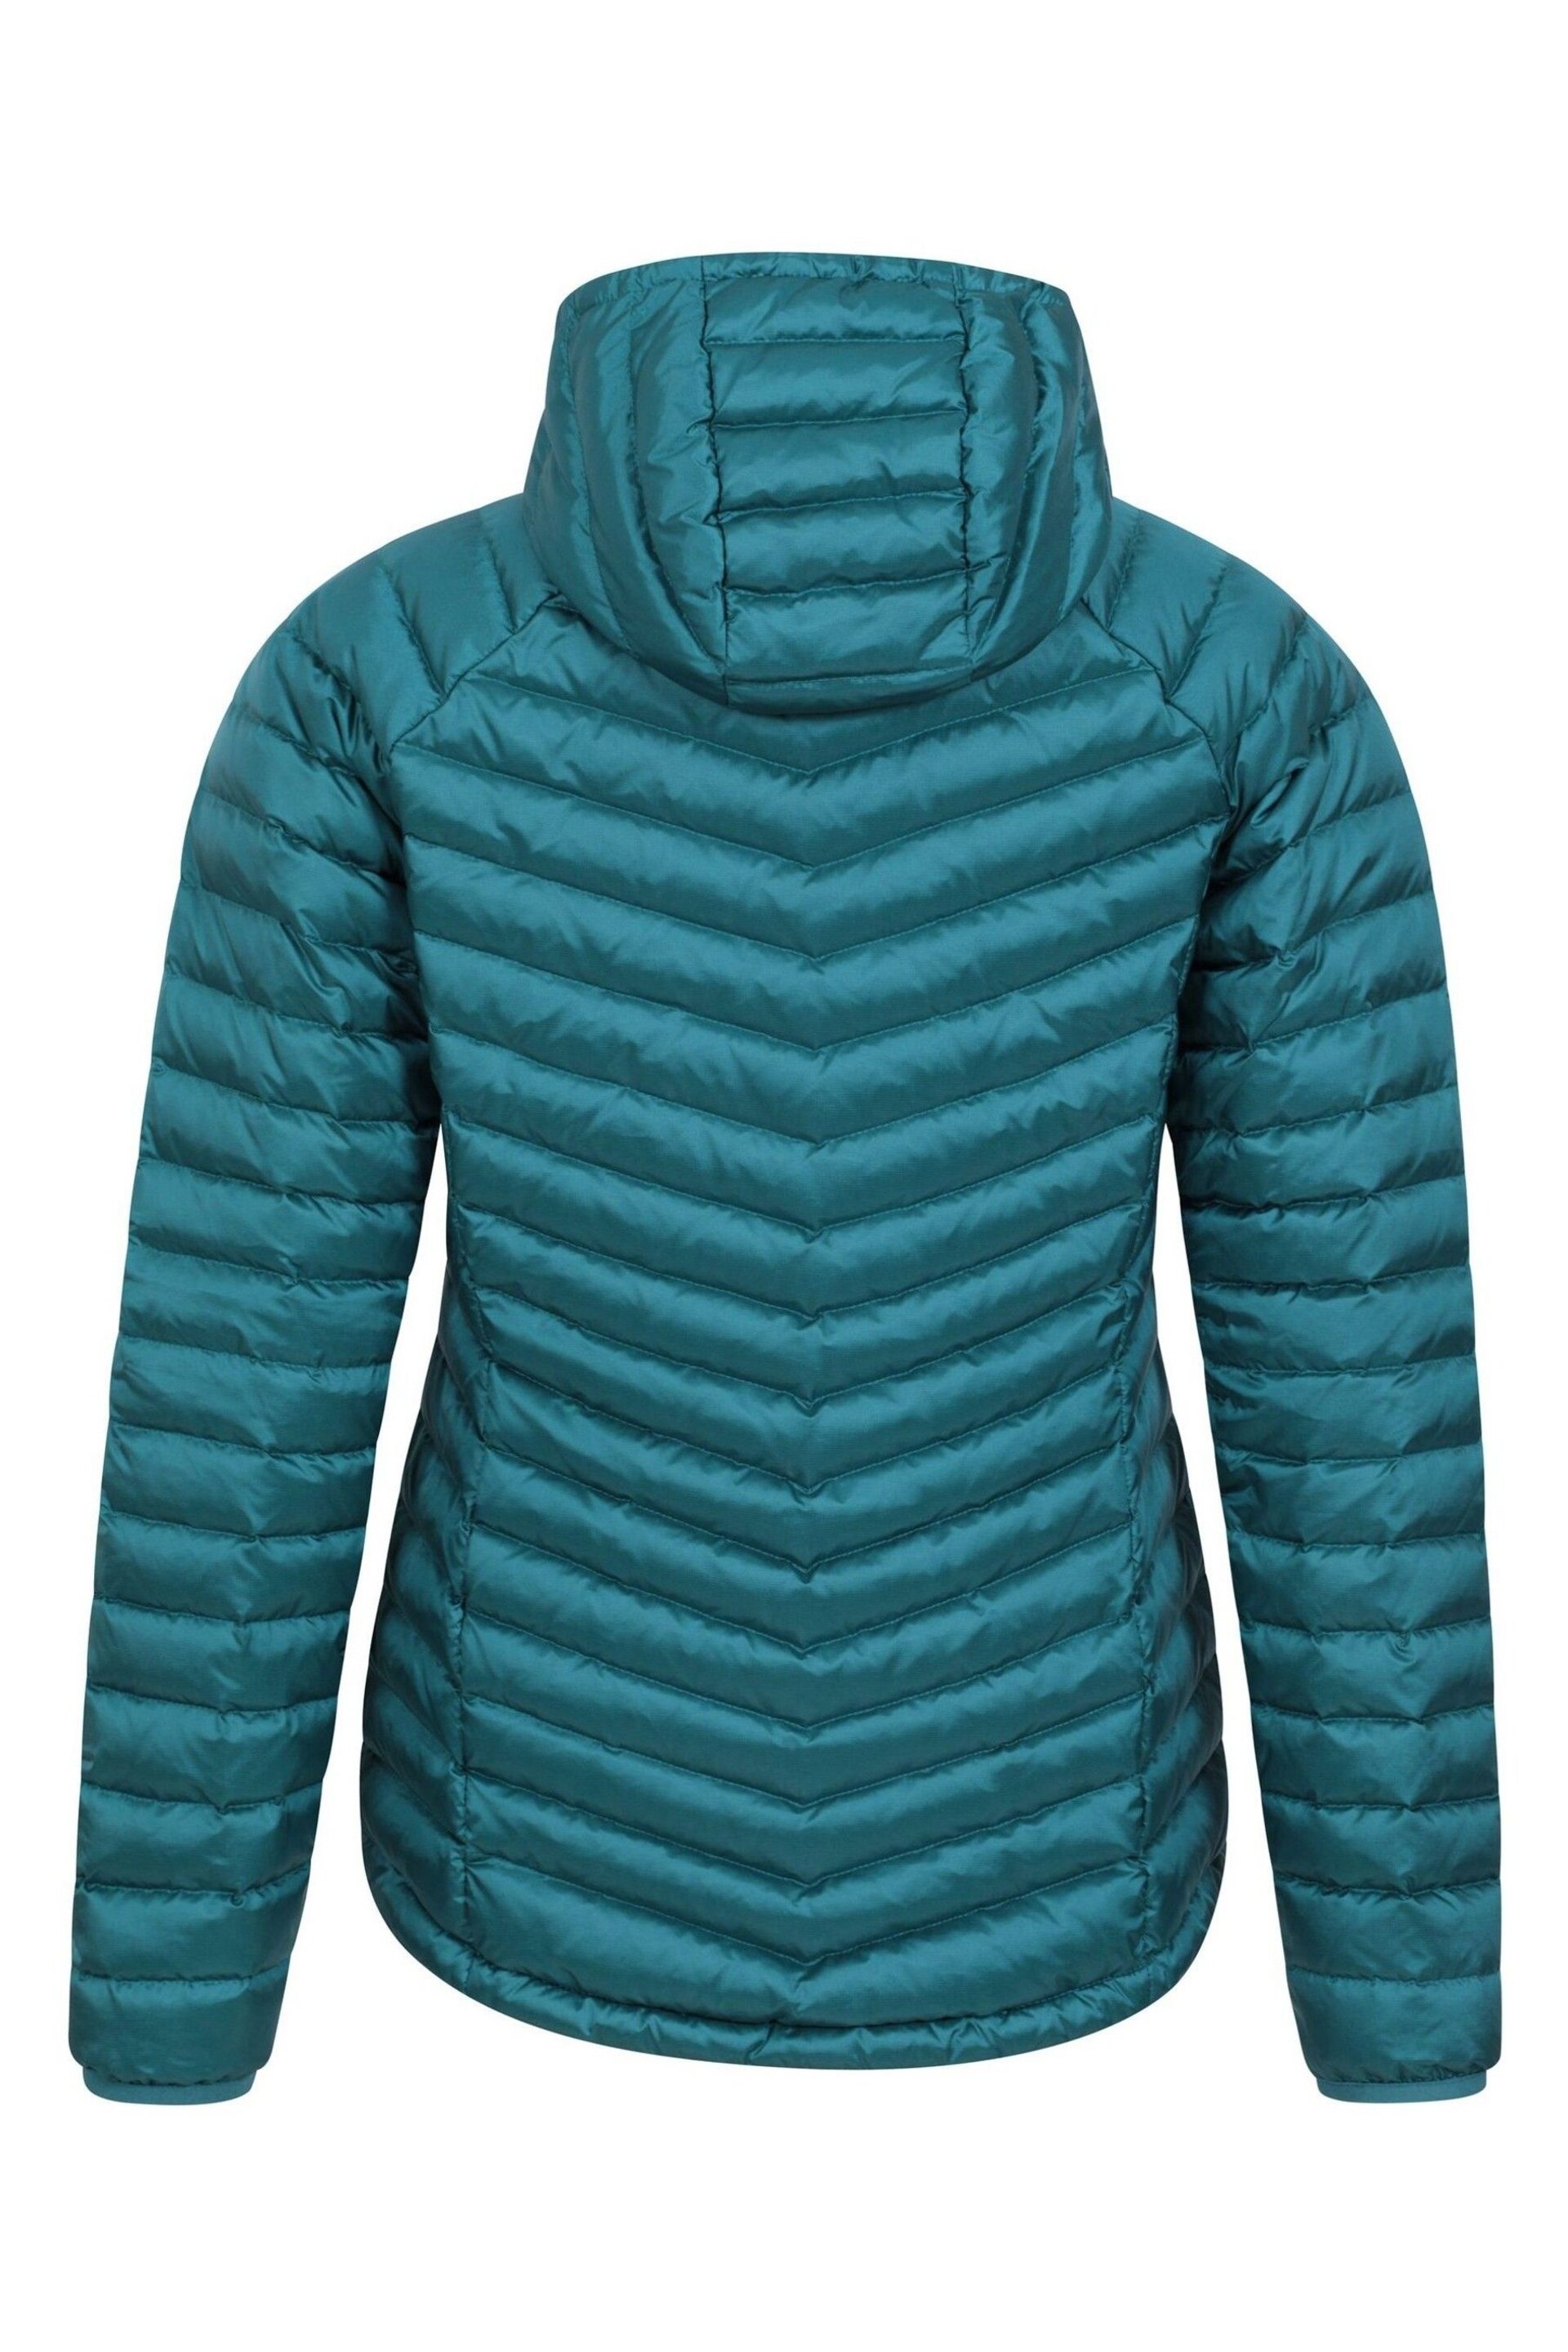 Mountain Warehouse Blue Womens Skyline Extreme Water Resistant Down Jacket - Image 3 of 9